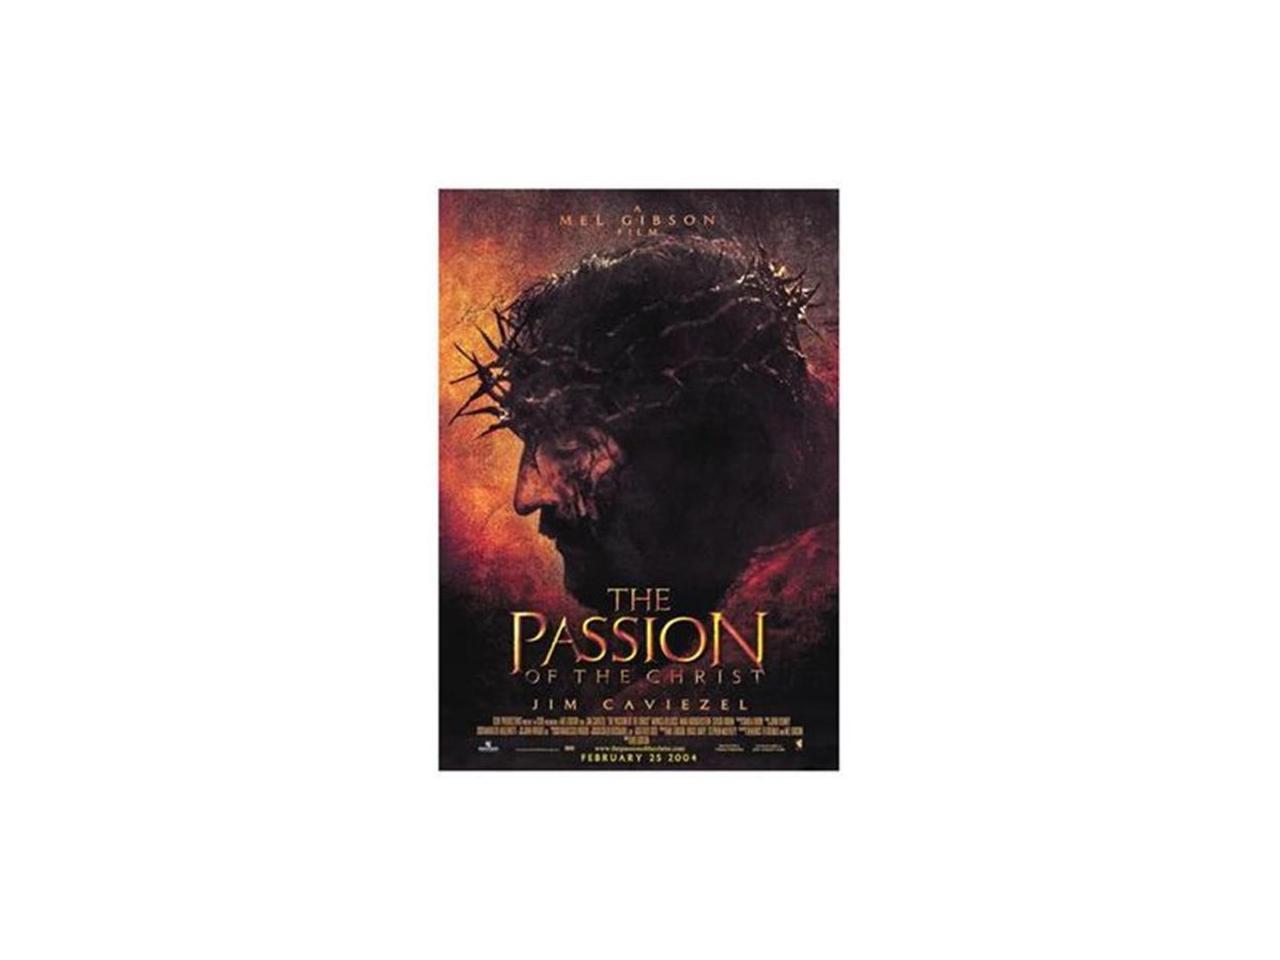 the passion of christ movie covers